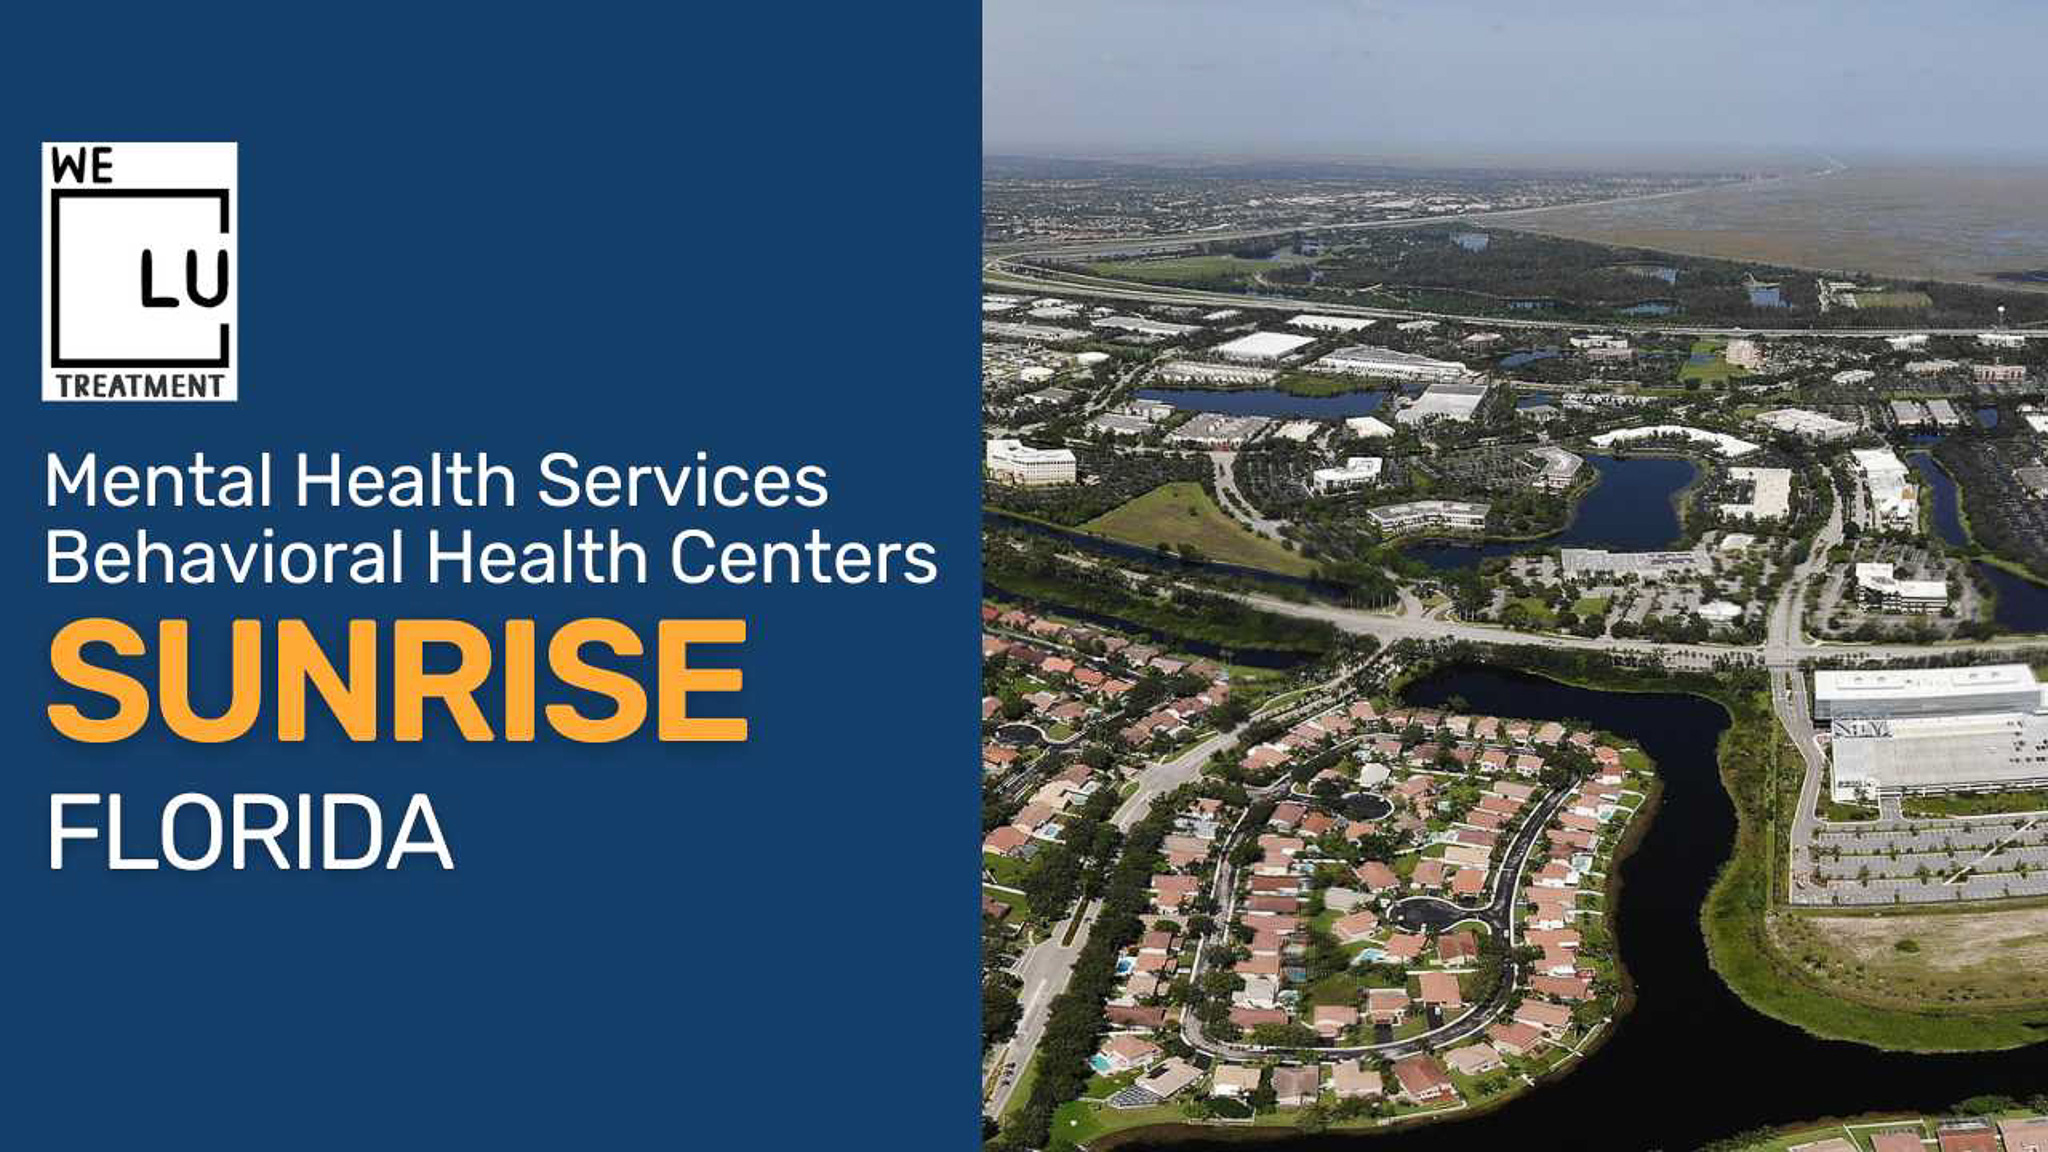 Sunrise FL (MH) We Level Up treatment center for drug and alcohol rehab detox and mental health services - Image 1